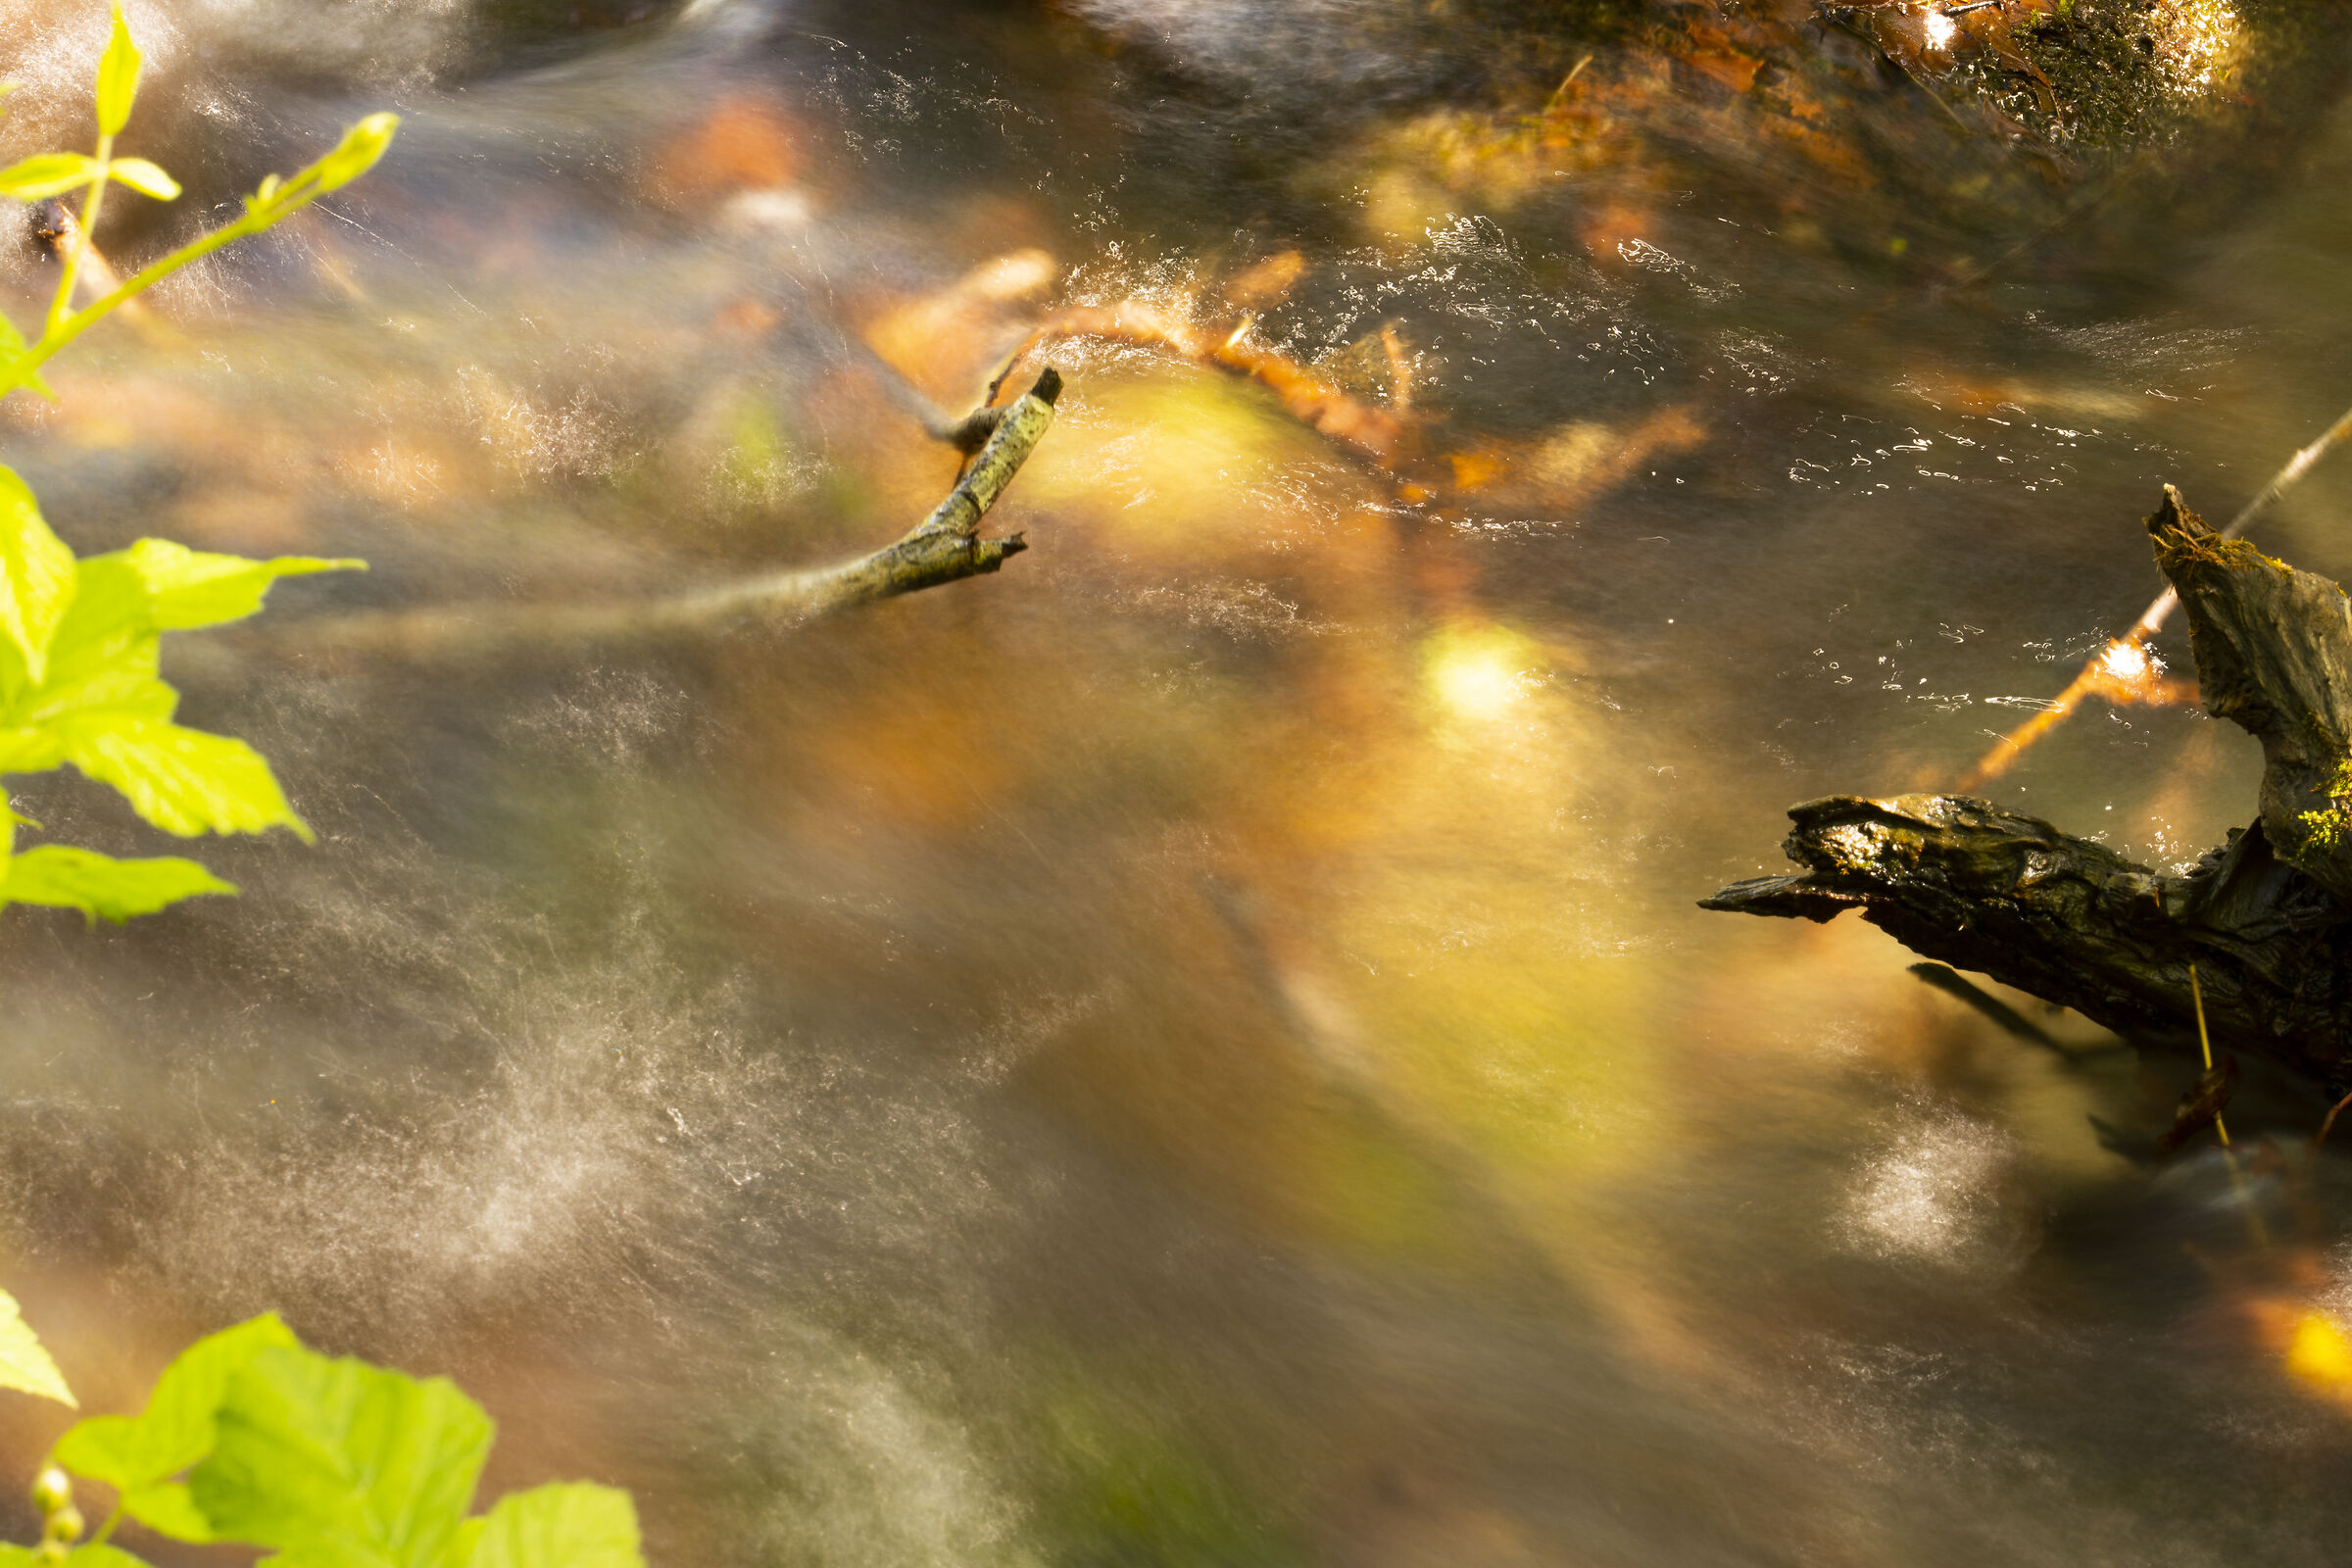 Reflections on the stream...